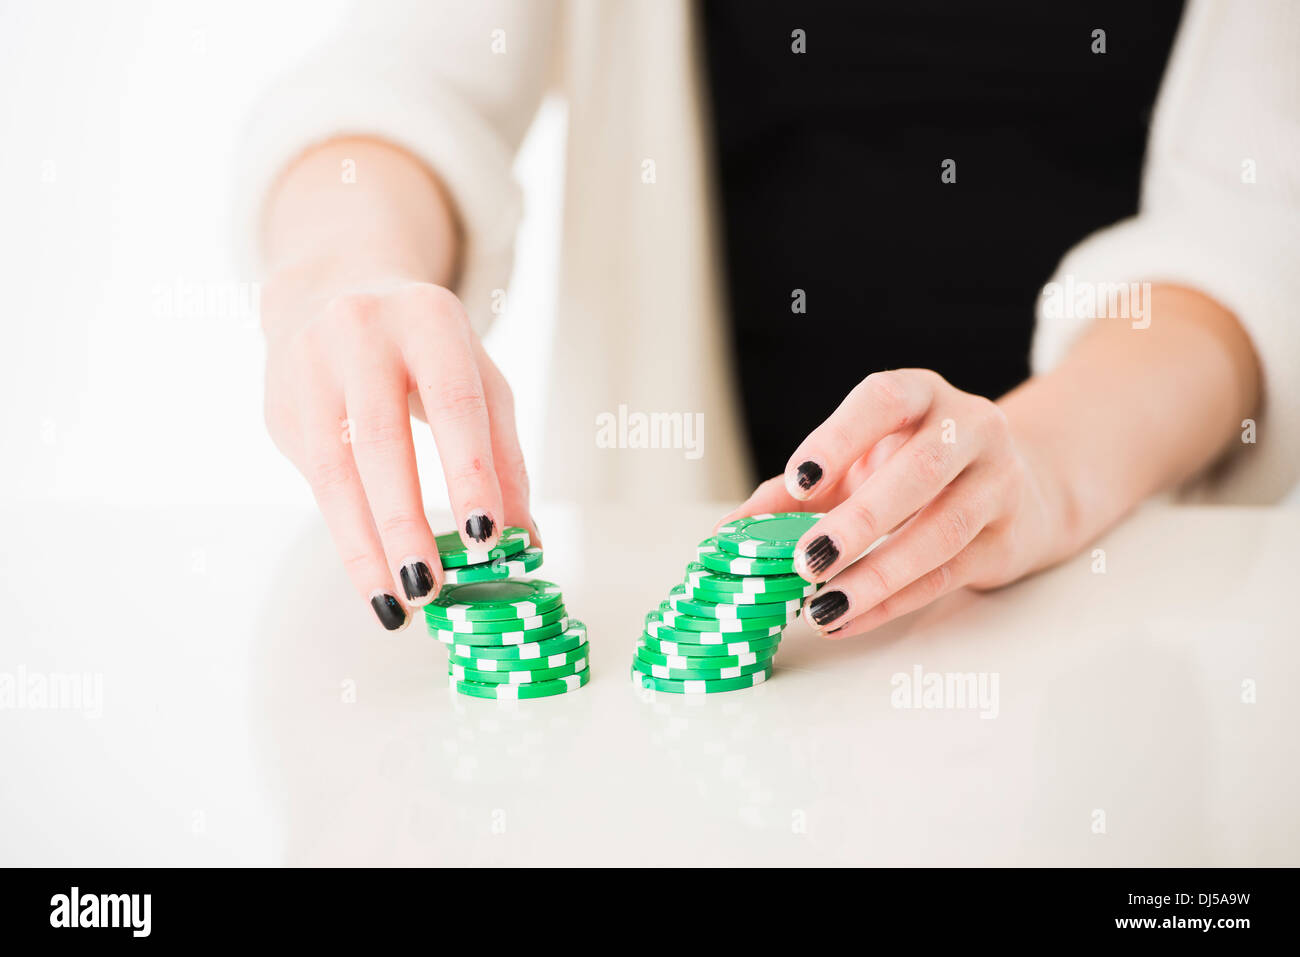 Hands of woman holding green poker chips Stock Photo